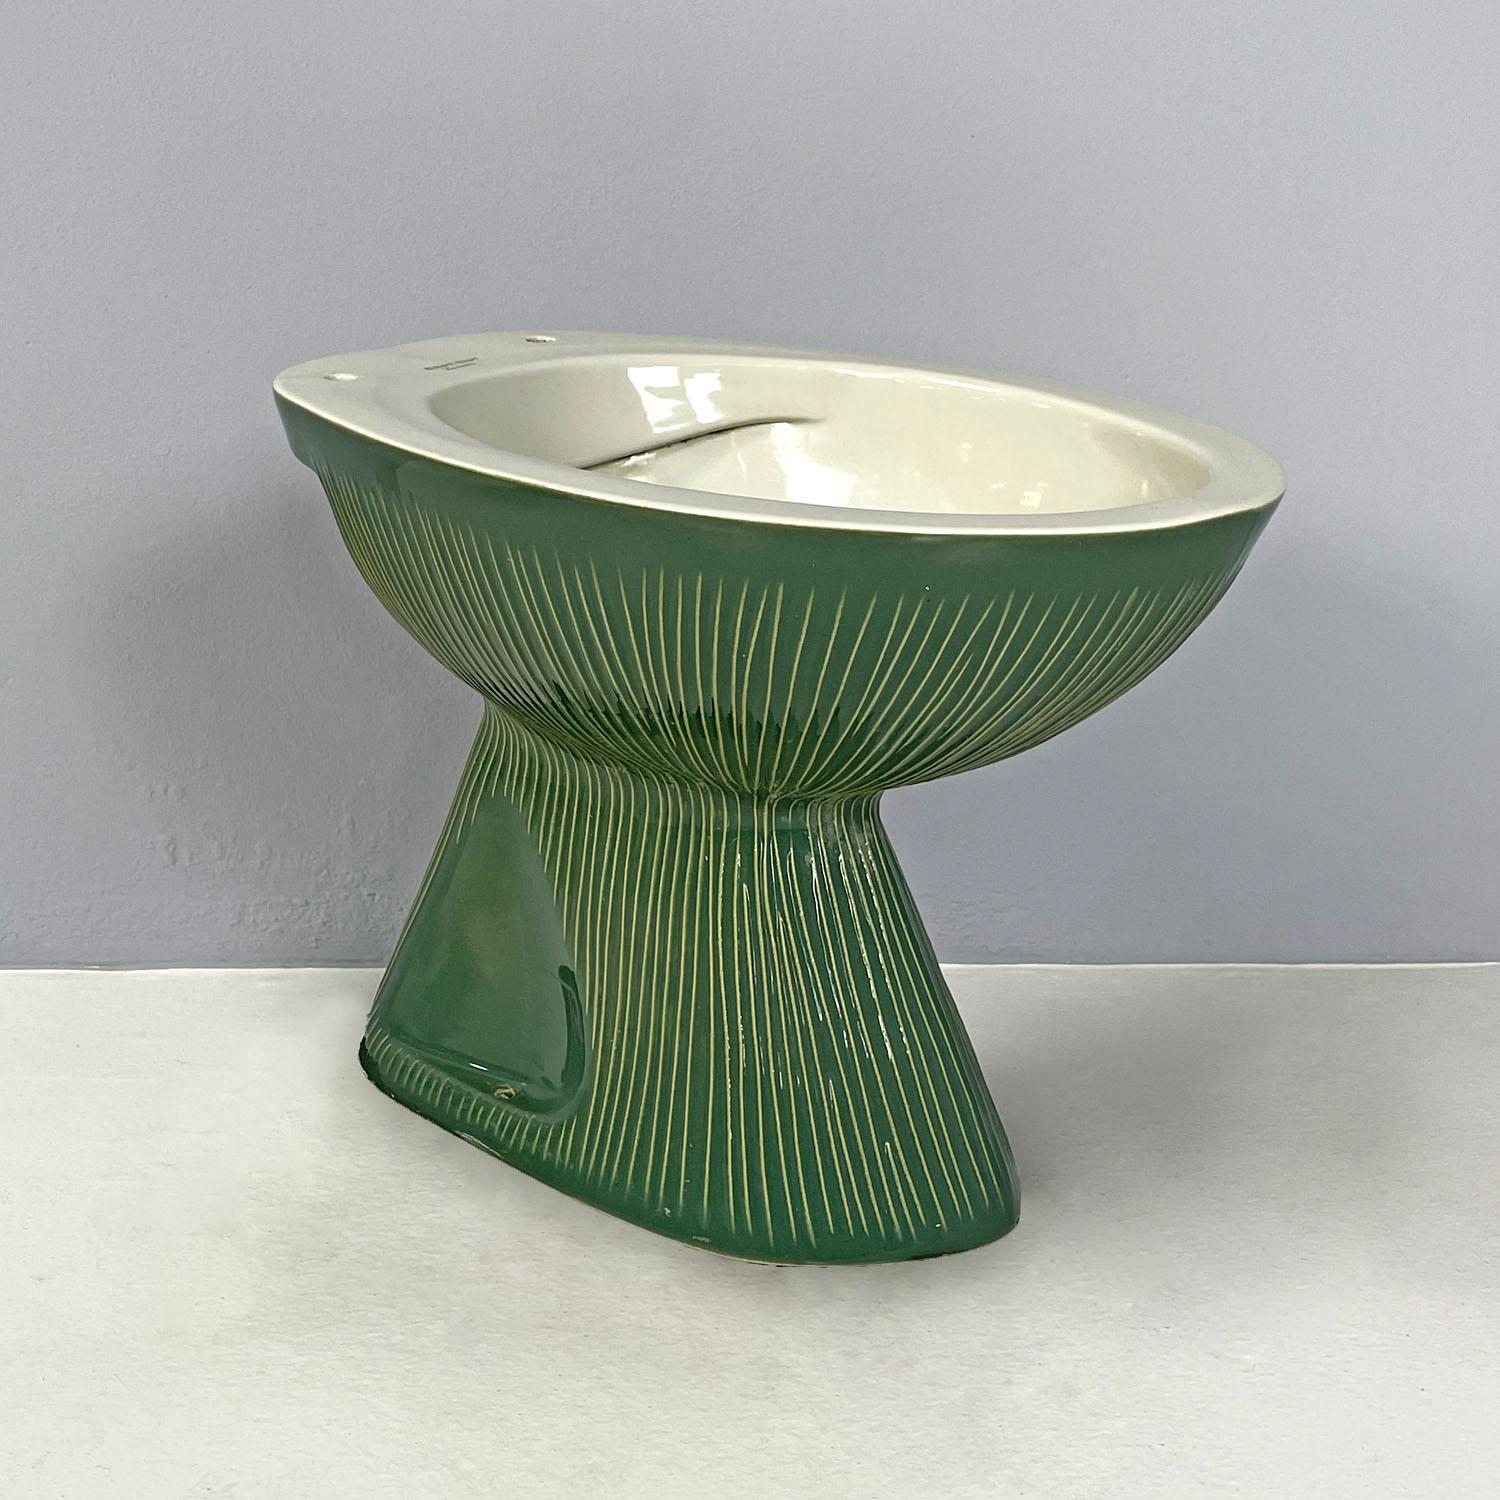 Italian modern water closet Gardena by Antonia Campi for Richard Ginori, 1970s
Water closet mod. Gardena in ceramic. The upper part is in white ceramic, while the rest is in green glazed ceramic with slightly raised yellow and light green vertical